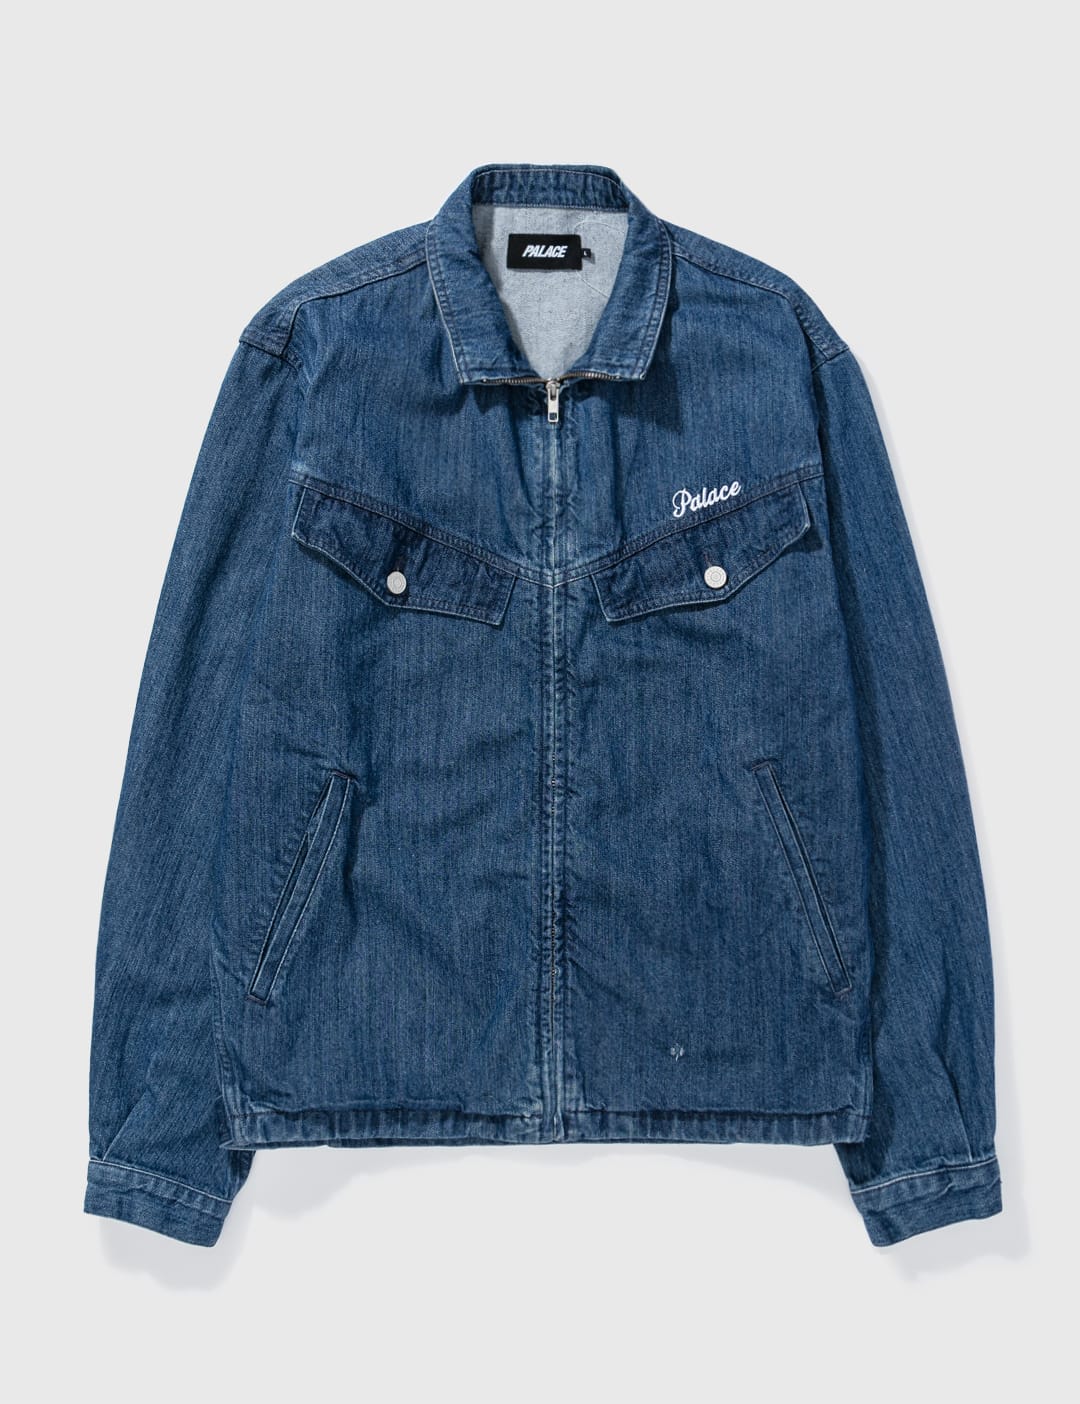 Palace Skateboards - PALACE SKATEBOARDS DENIM ZIP UP JACKET | HBX -  Globally Curated Fashion and Lifestyle by Hypebeast